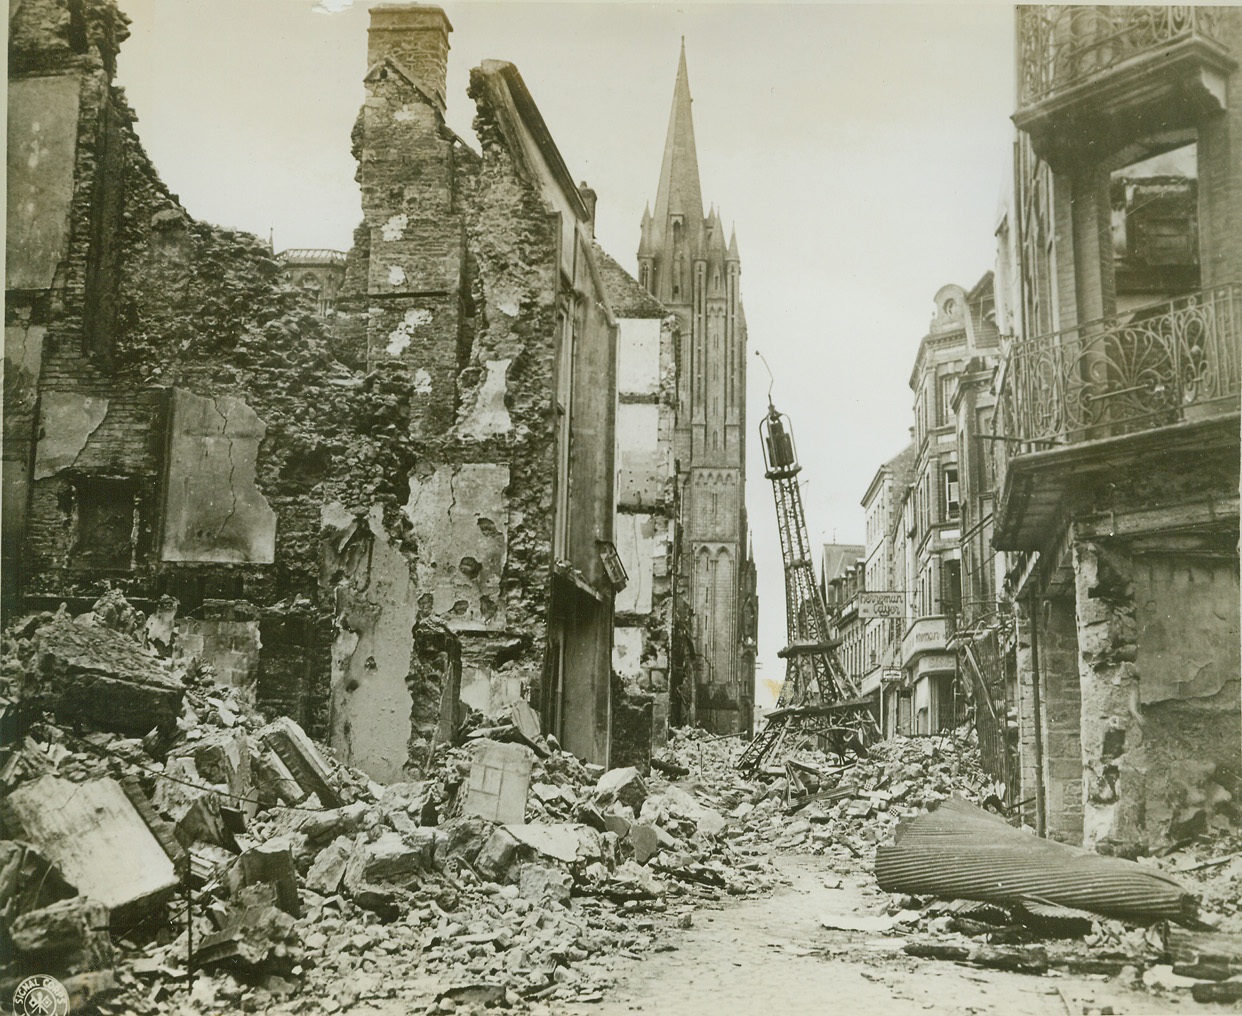 Miniature Eiffel Tower Amid Wreckage, 8/3/1944. France—Flanked by war-torn buildings, a small replica of the famous Eiffel Tower rests atop a heap of rubble in a Coutances Street. In the center, background, is the Cathedral, seemingly undamanged. Credit: U.S. Army photo from ACME;